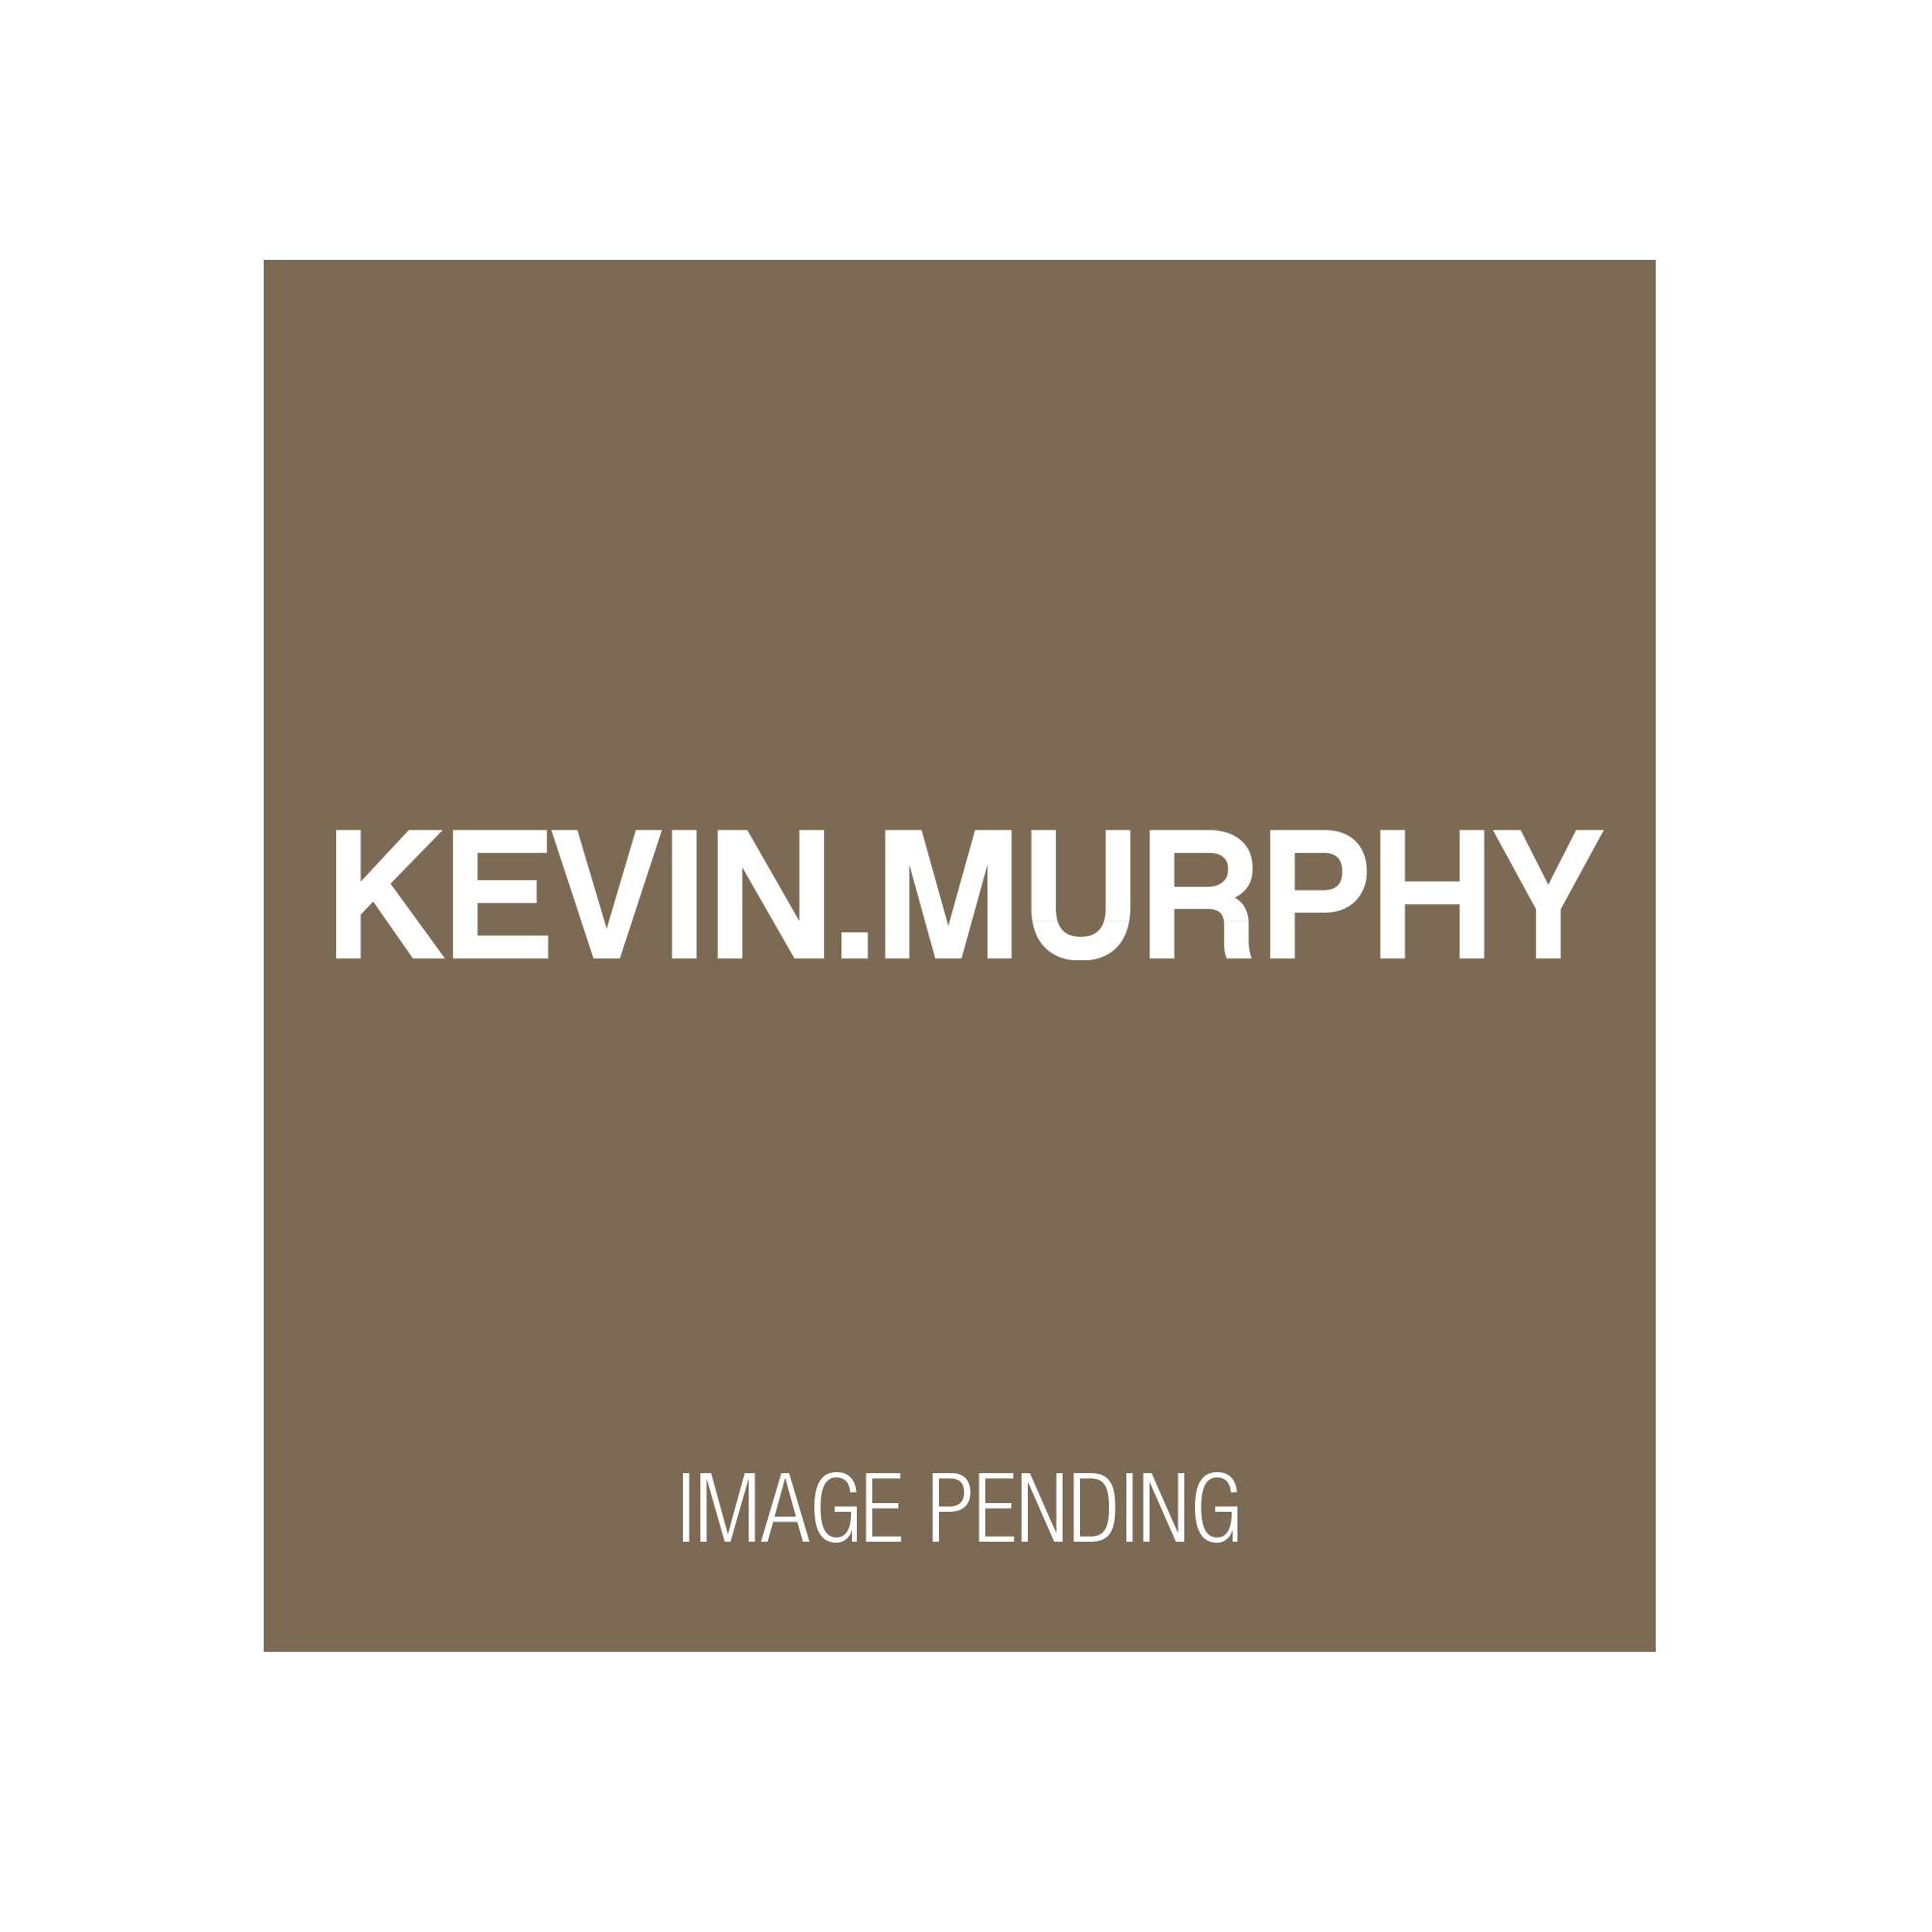 KEVIN.MURPHY COLOR.ME Swatch Book - 2021, Version 2